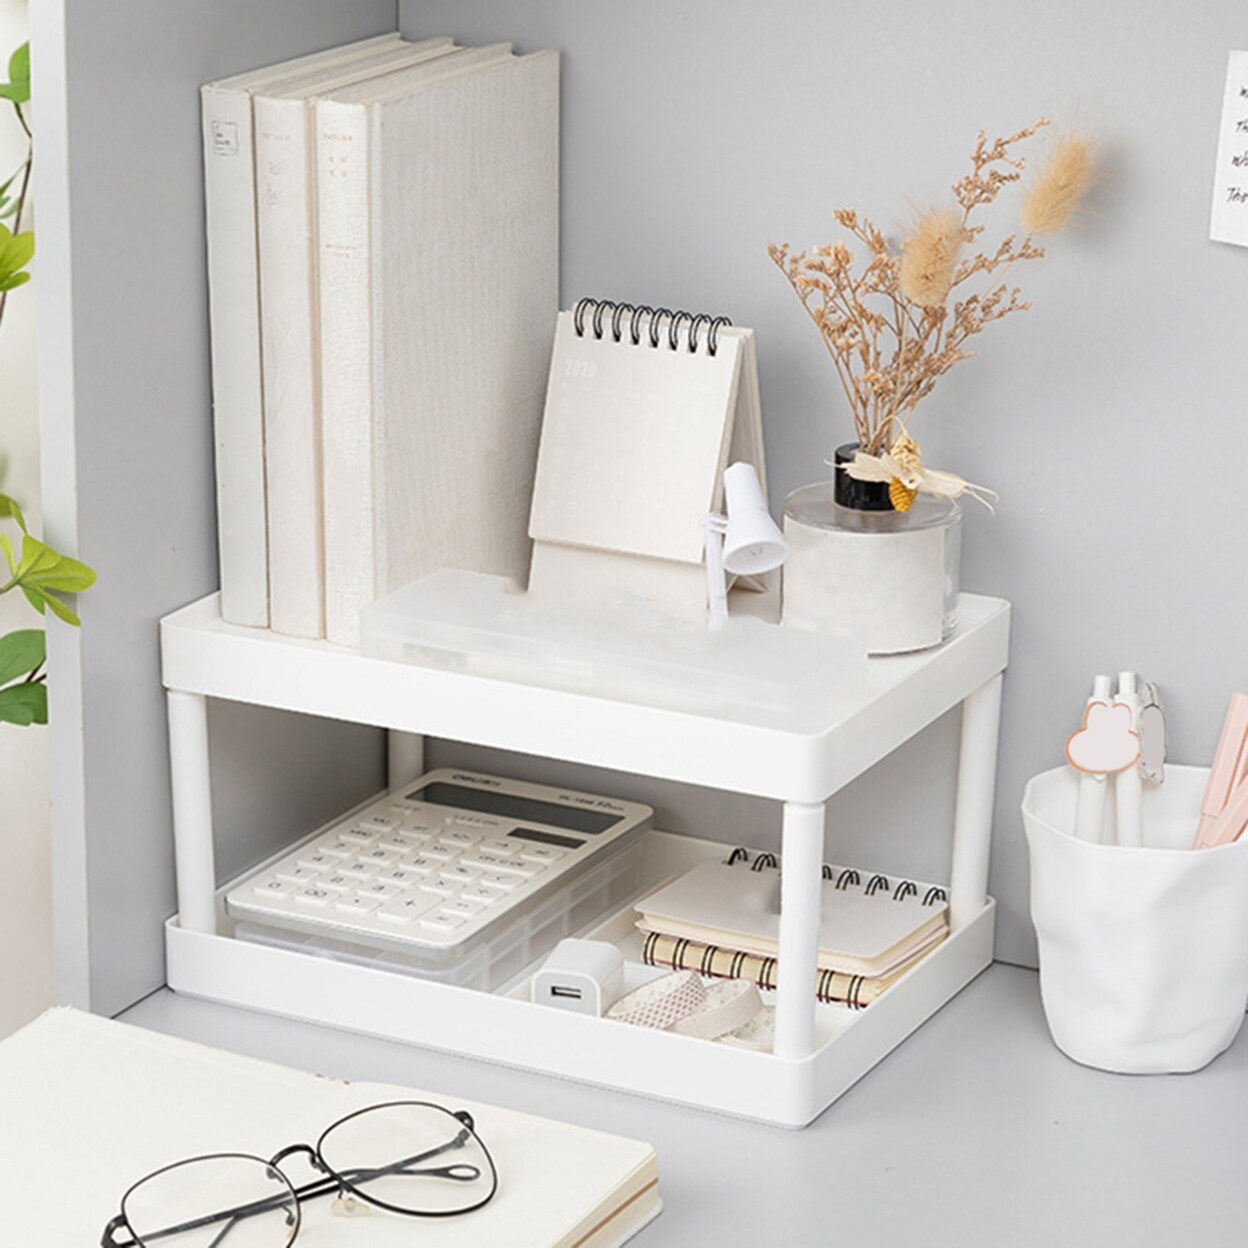 https://ak1.ostkcdn.com/images/products/is/images/direct/d1e757c641047ffcfa6b1f6a0af2033cdcfd995c/Storage-Shelf-Multifunctional-DoubleLayer-Plastic-Desktop-Cosmetic-Sundries-Organizer-For-Home.jpg